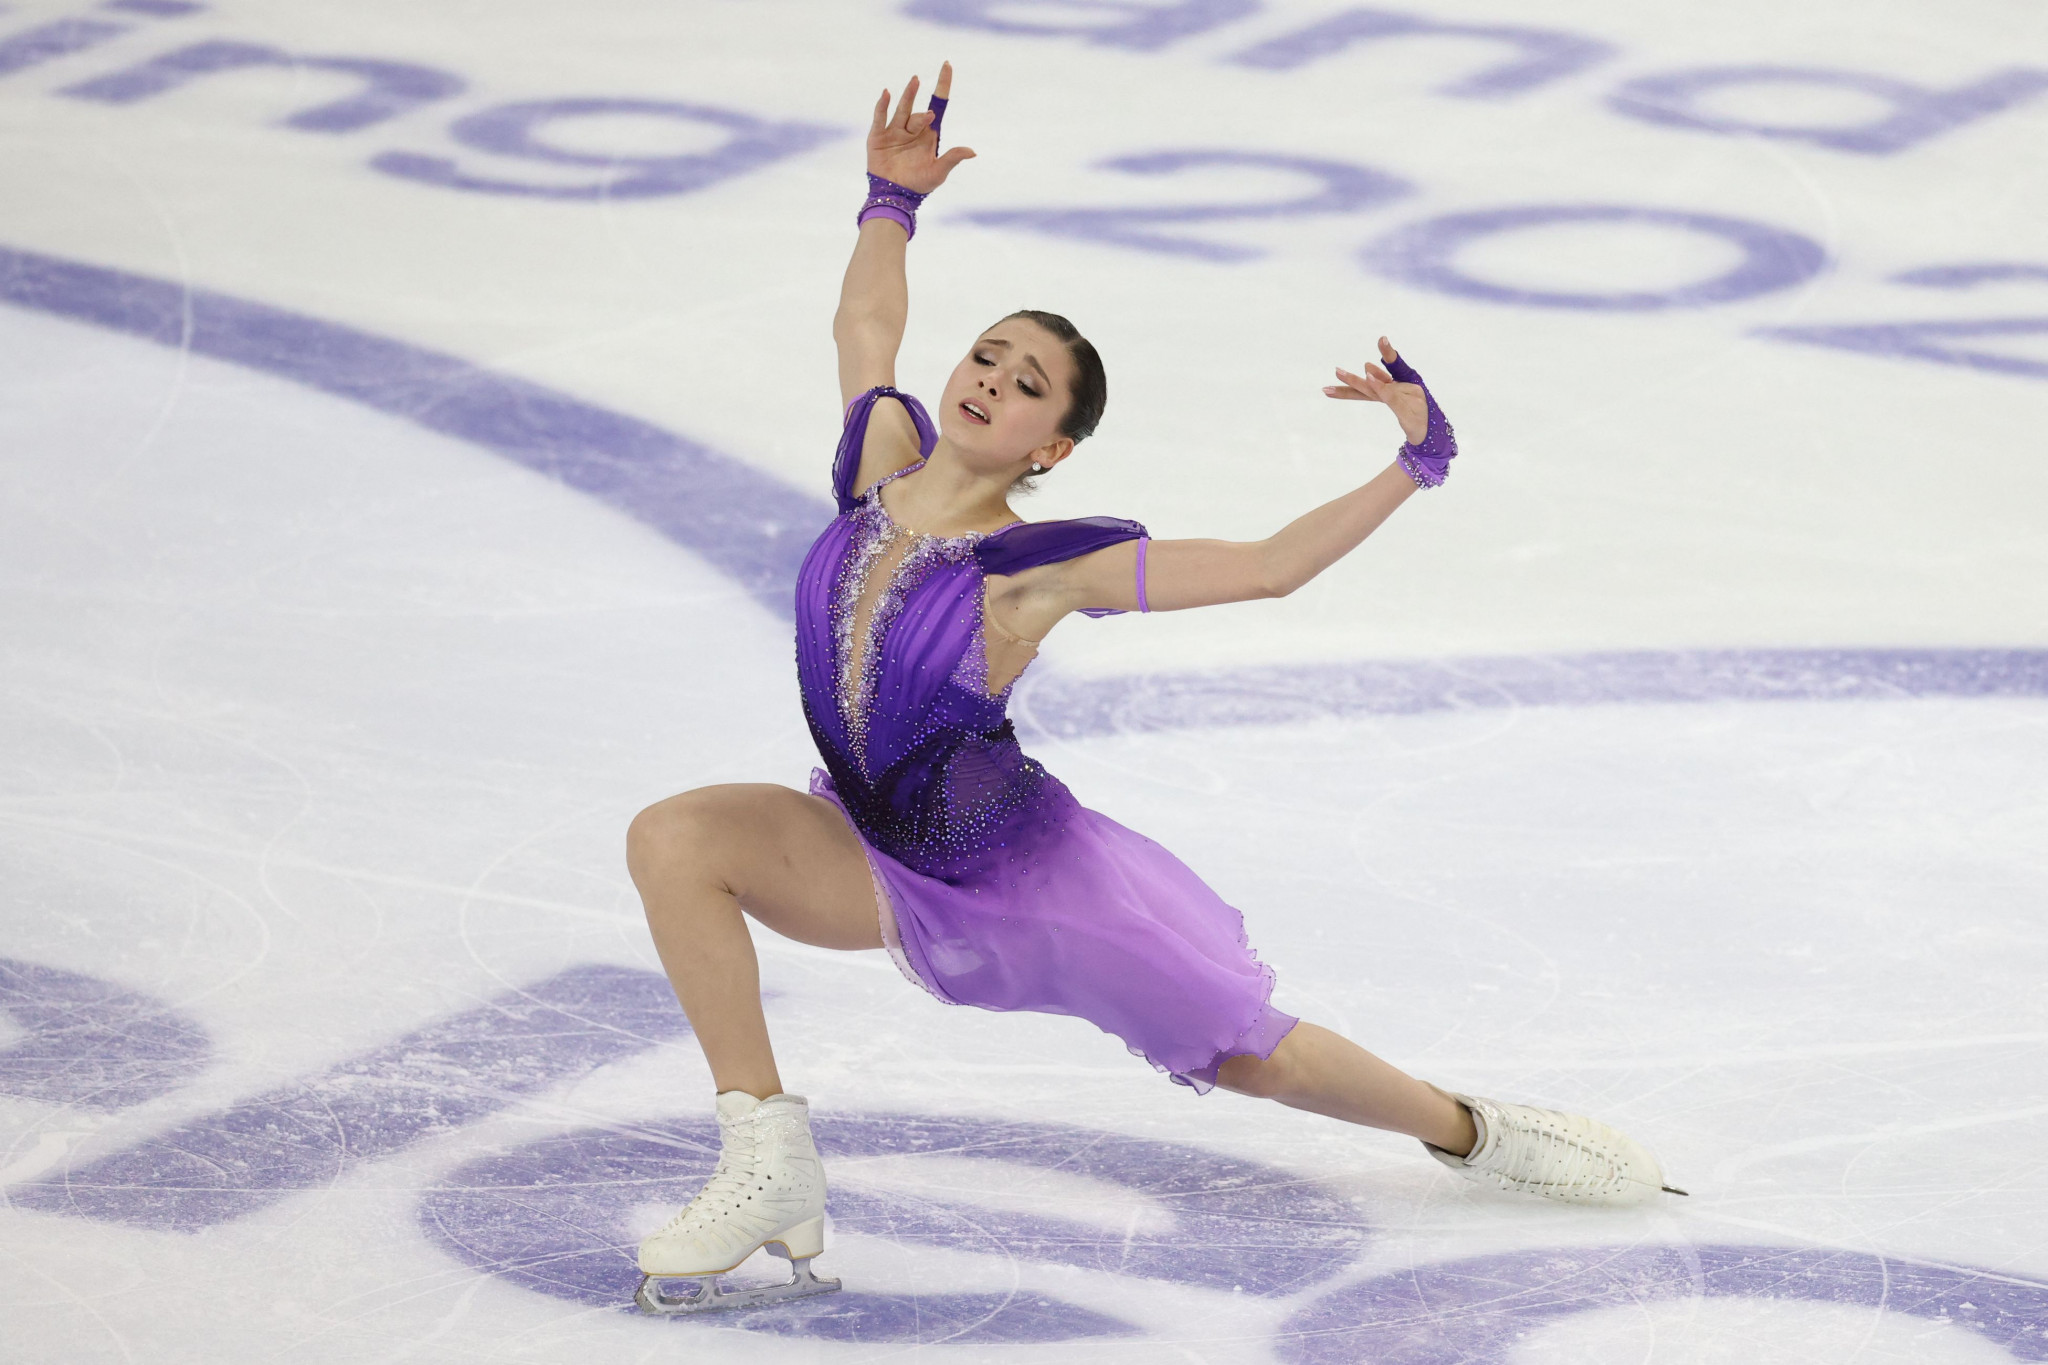 United States pairs skater Jessica Calalang, who spent eight months clearing her name with anti-doping authorities in 2021, has called for Russian teenager Kamila Valieva to be sanctioned in her ongoing case ©Getty Images